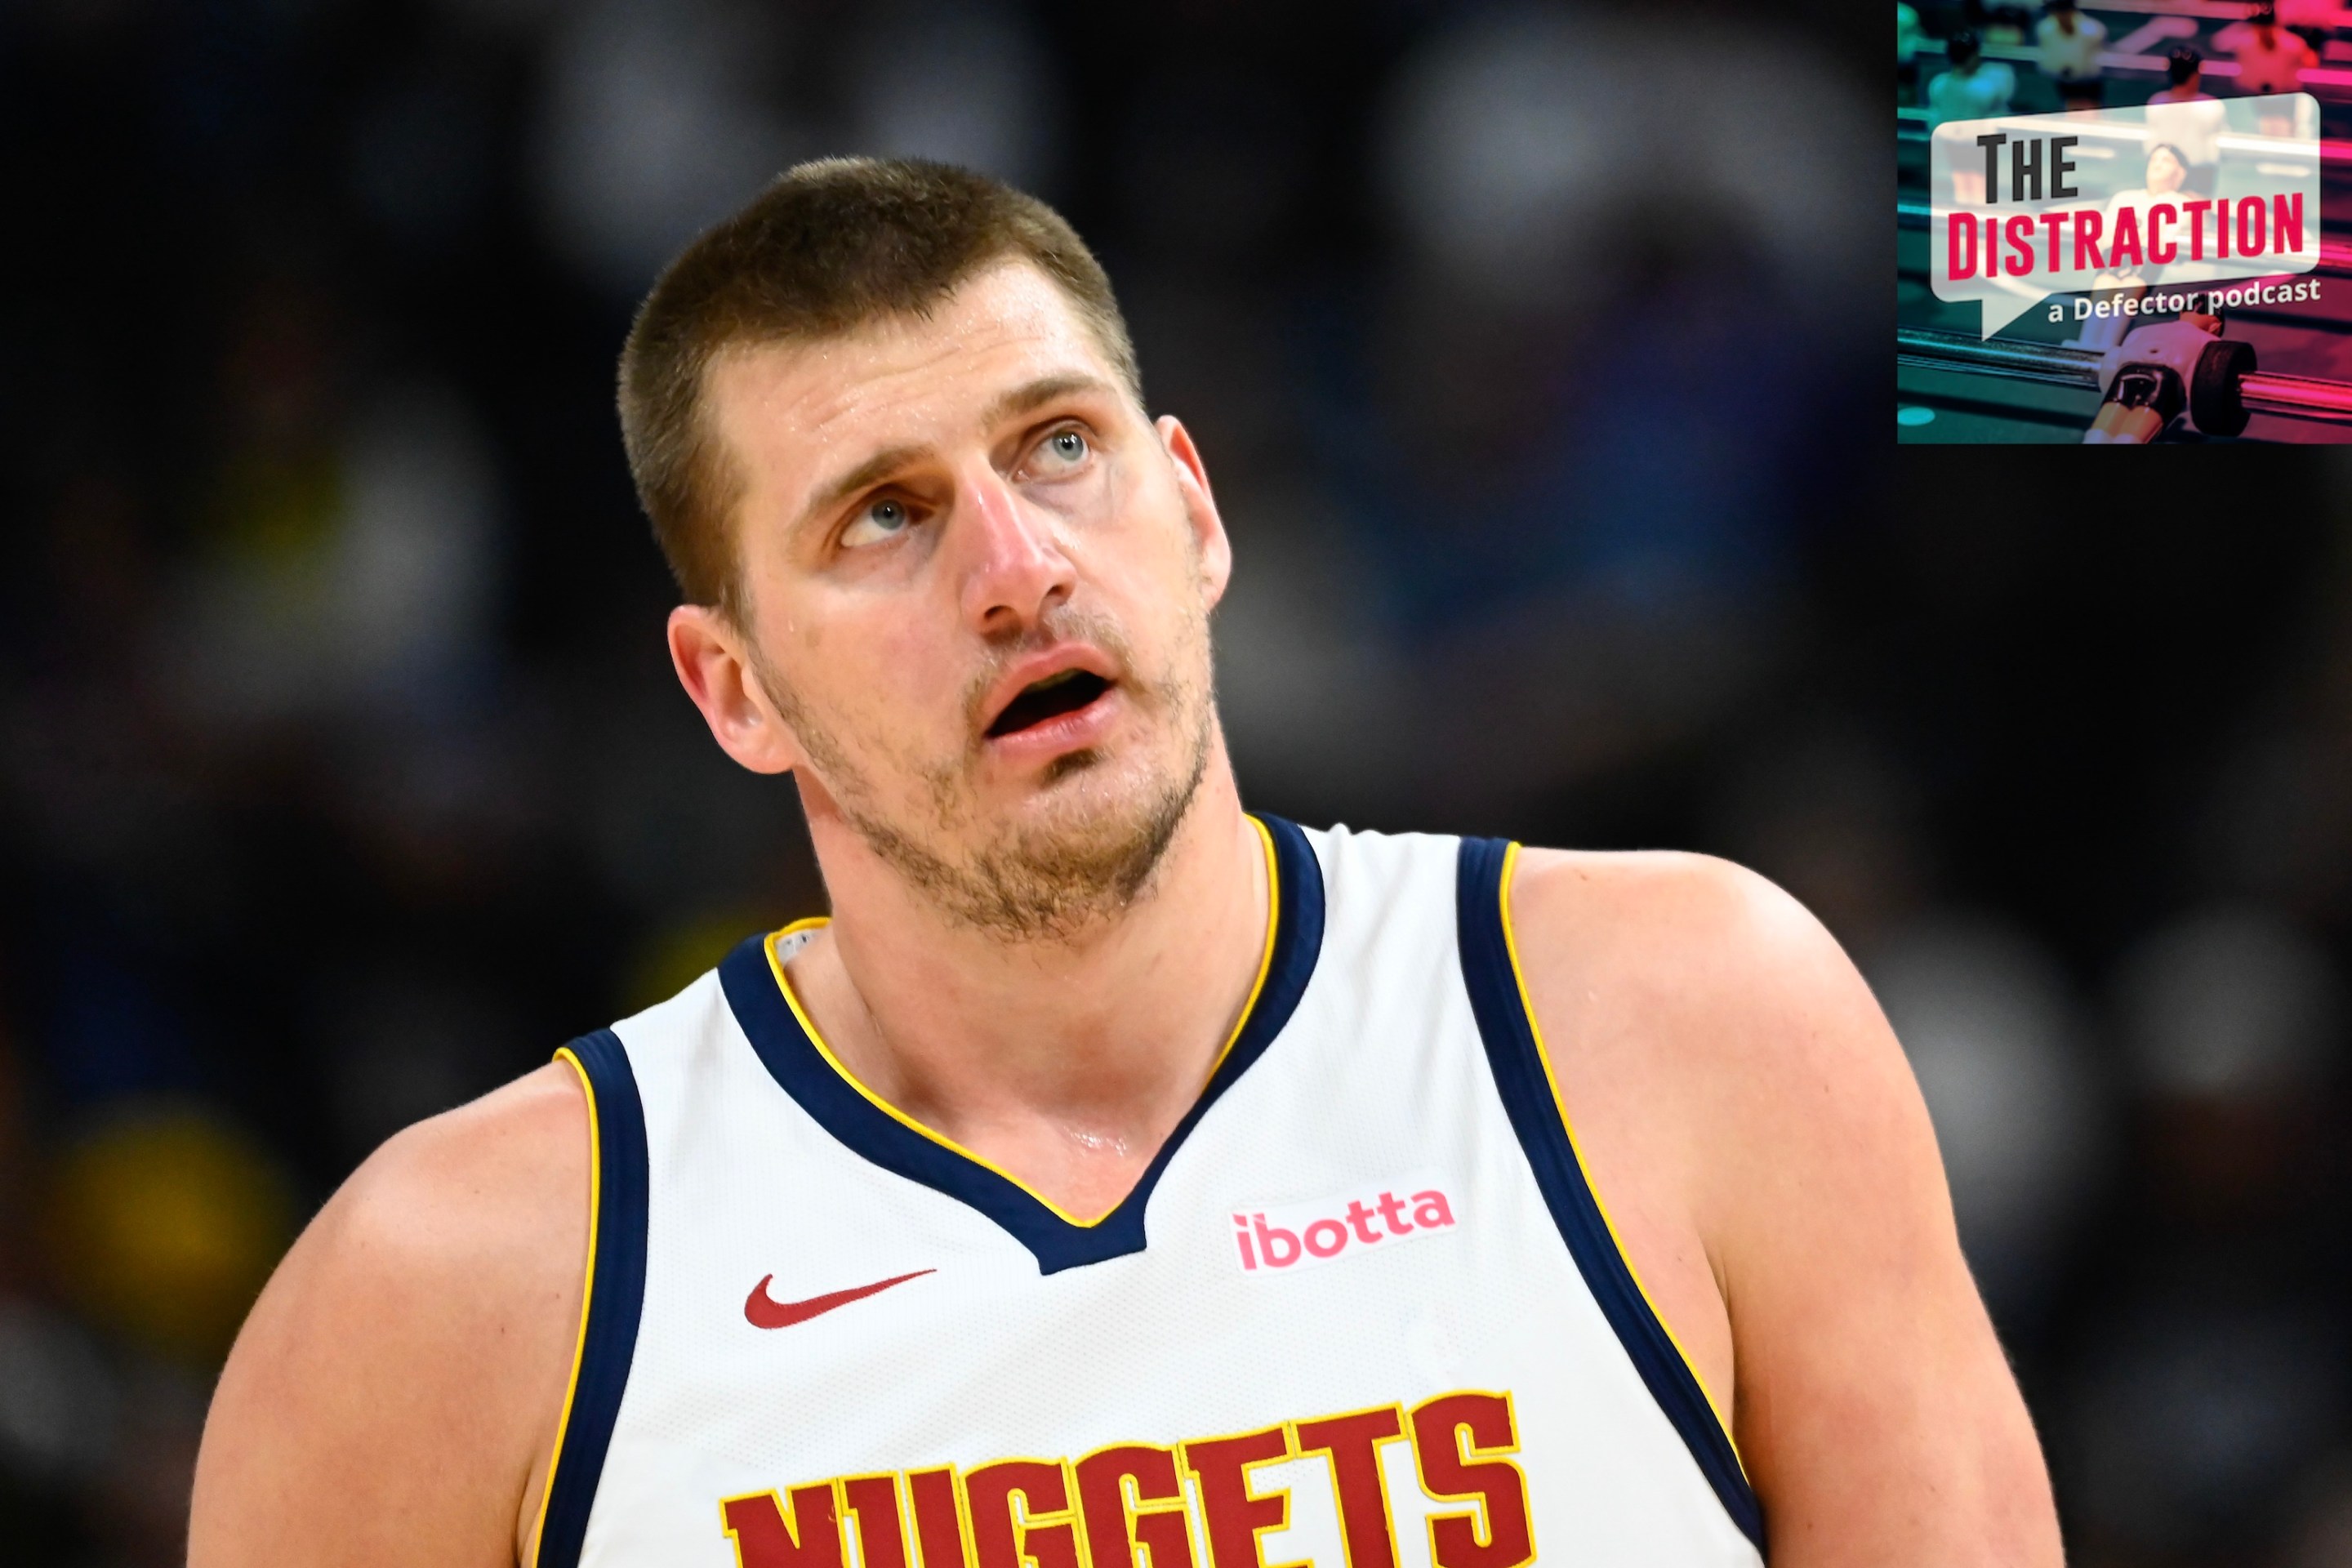 Nikola Jokic #15 of the Denver Nuggets looks on during the first half against the Utah Jazz at Delta Center on April 9, 2024. I put the little Distraction logo at upper right so it looks like he's glowering at it.